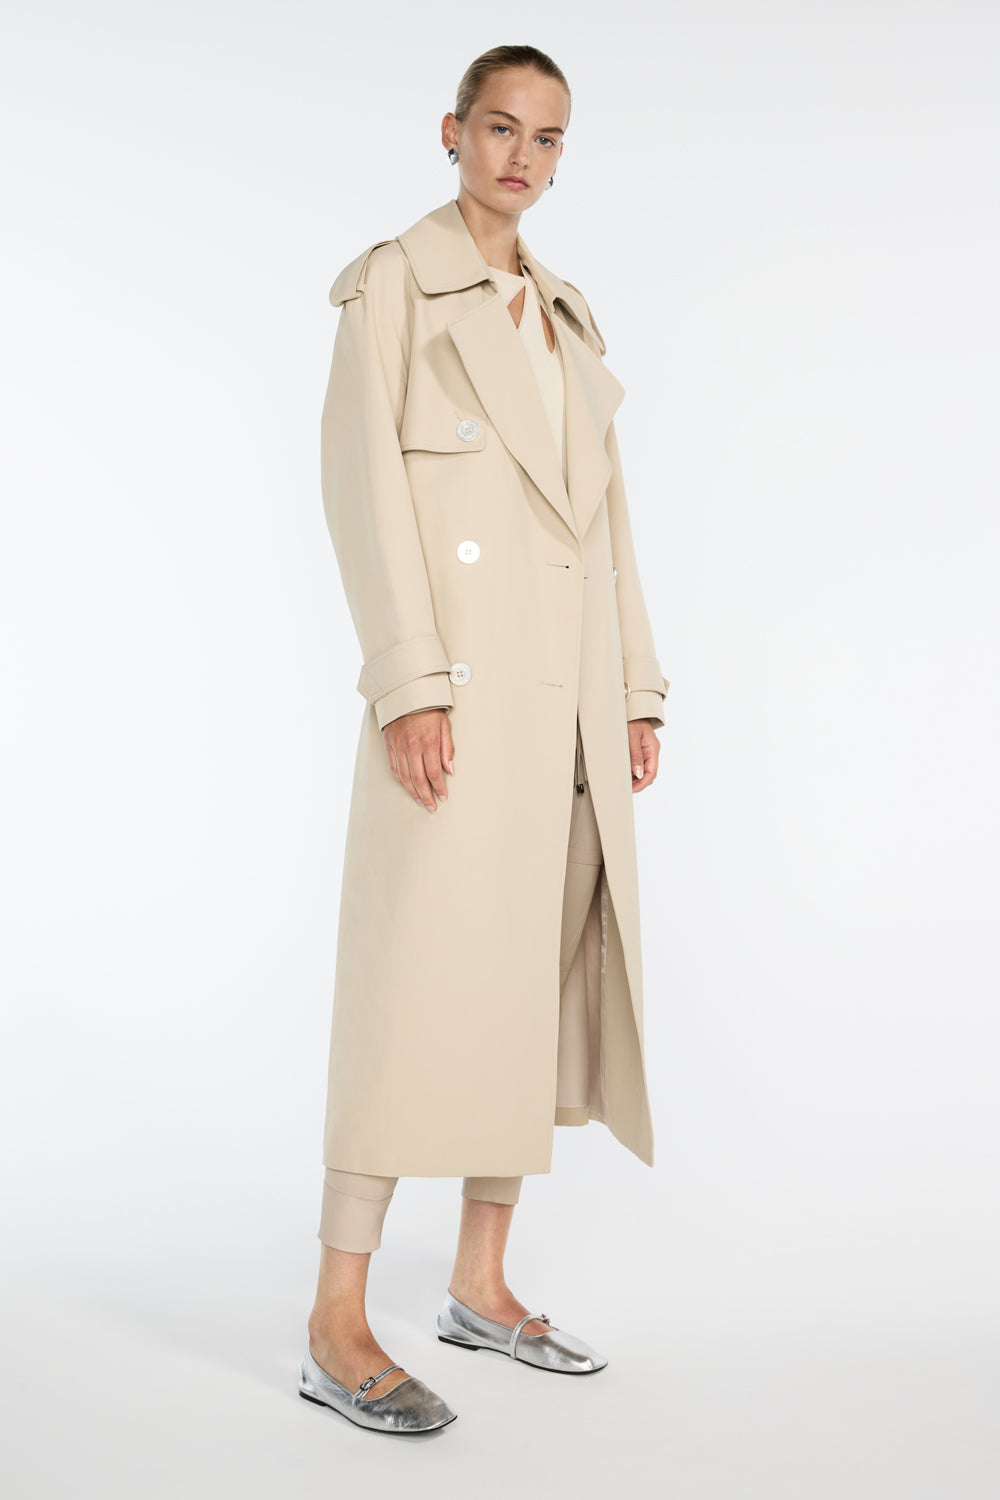 Streets Ahead Trench Coat – MANNING CARTELL